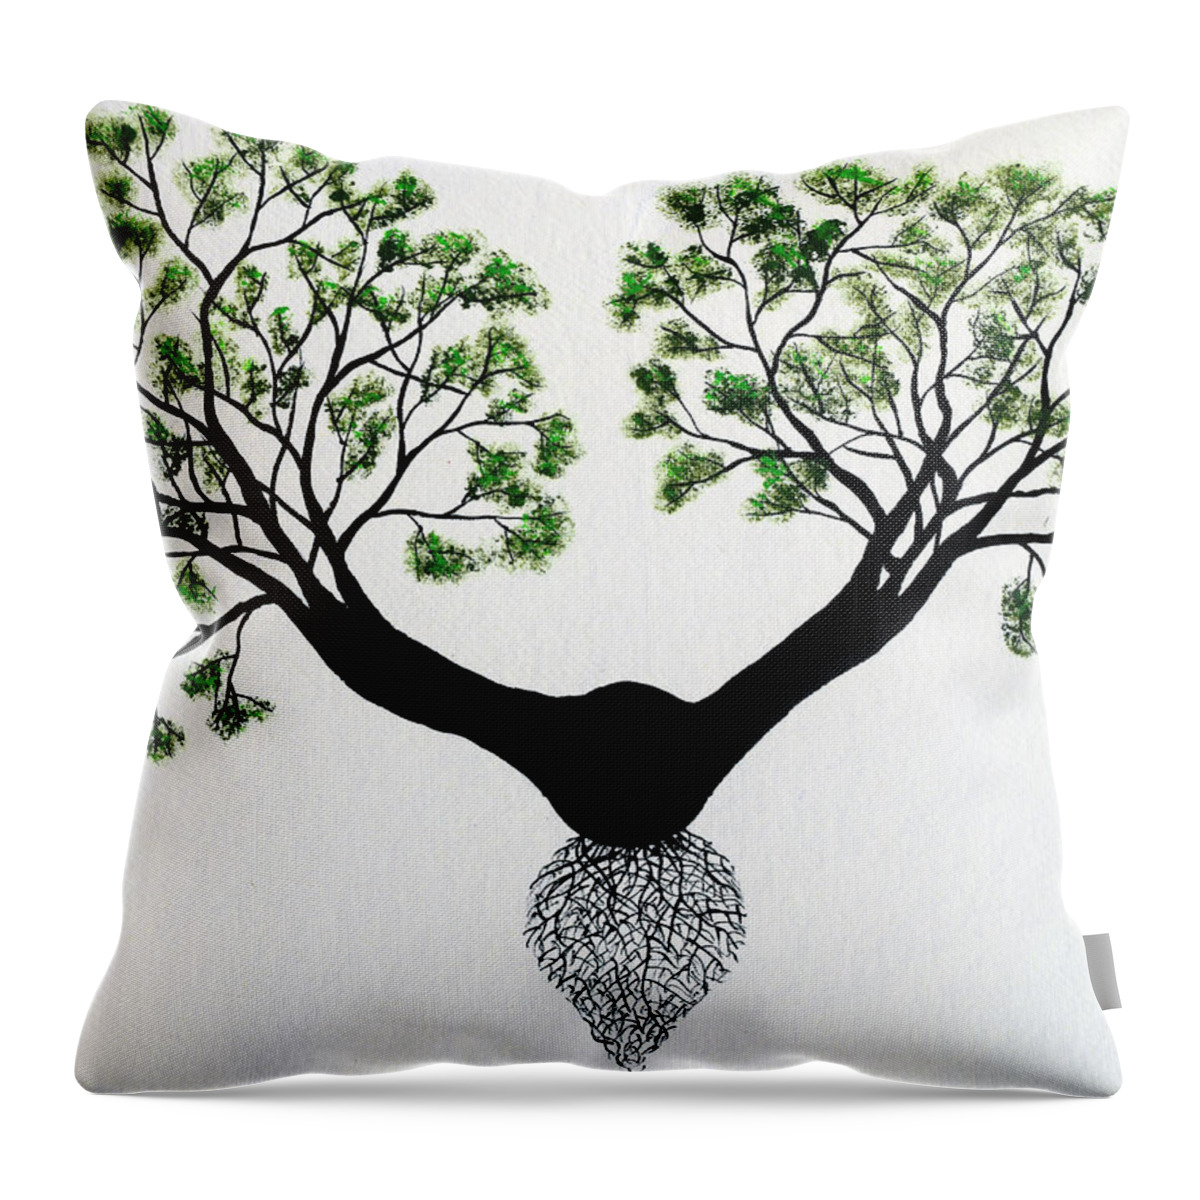 Tree Throw Pillow featuring the painting Conjurno by Sumit Mehndiratta